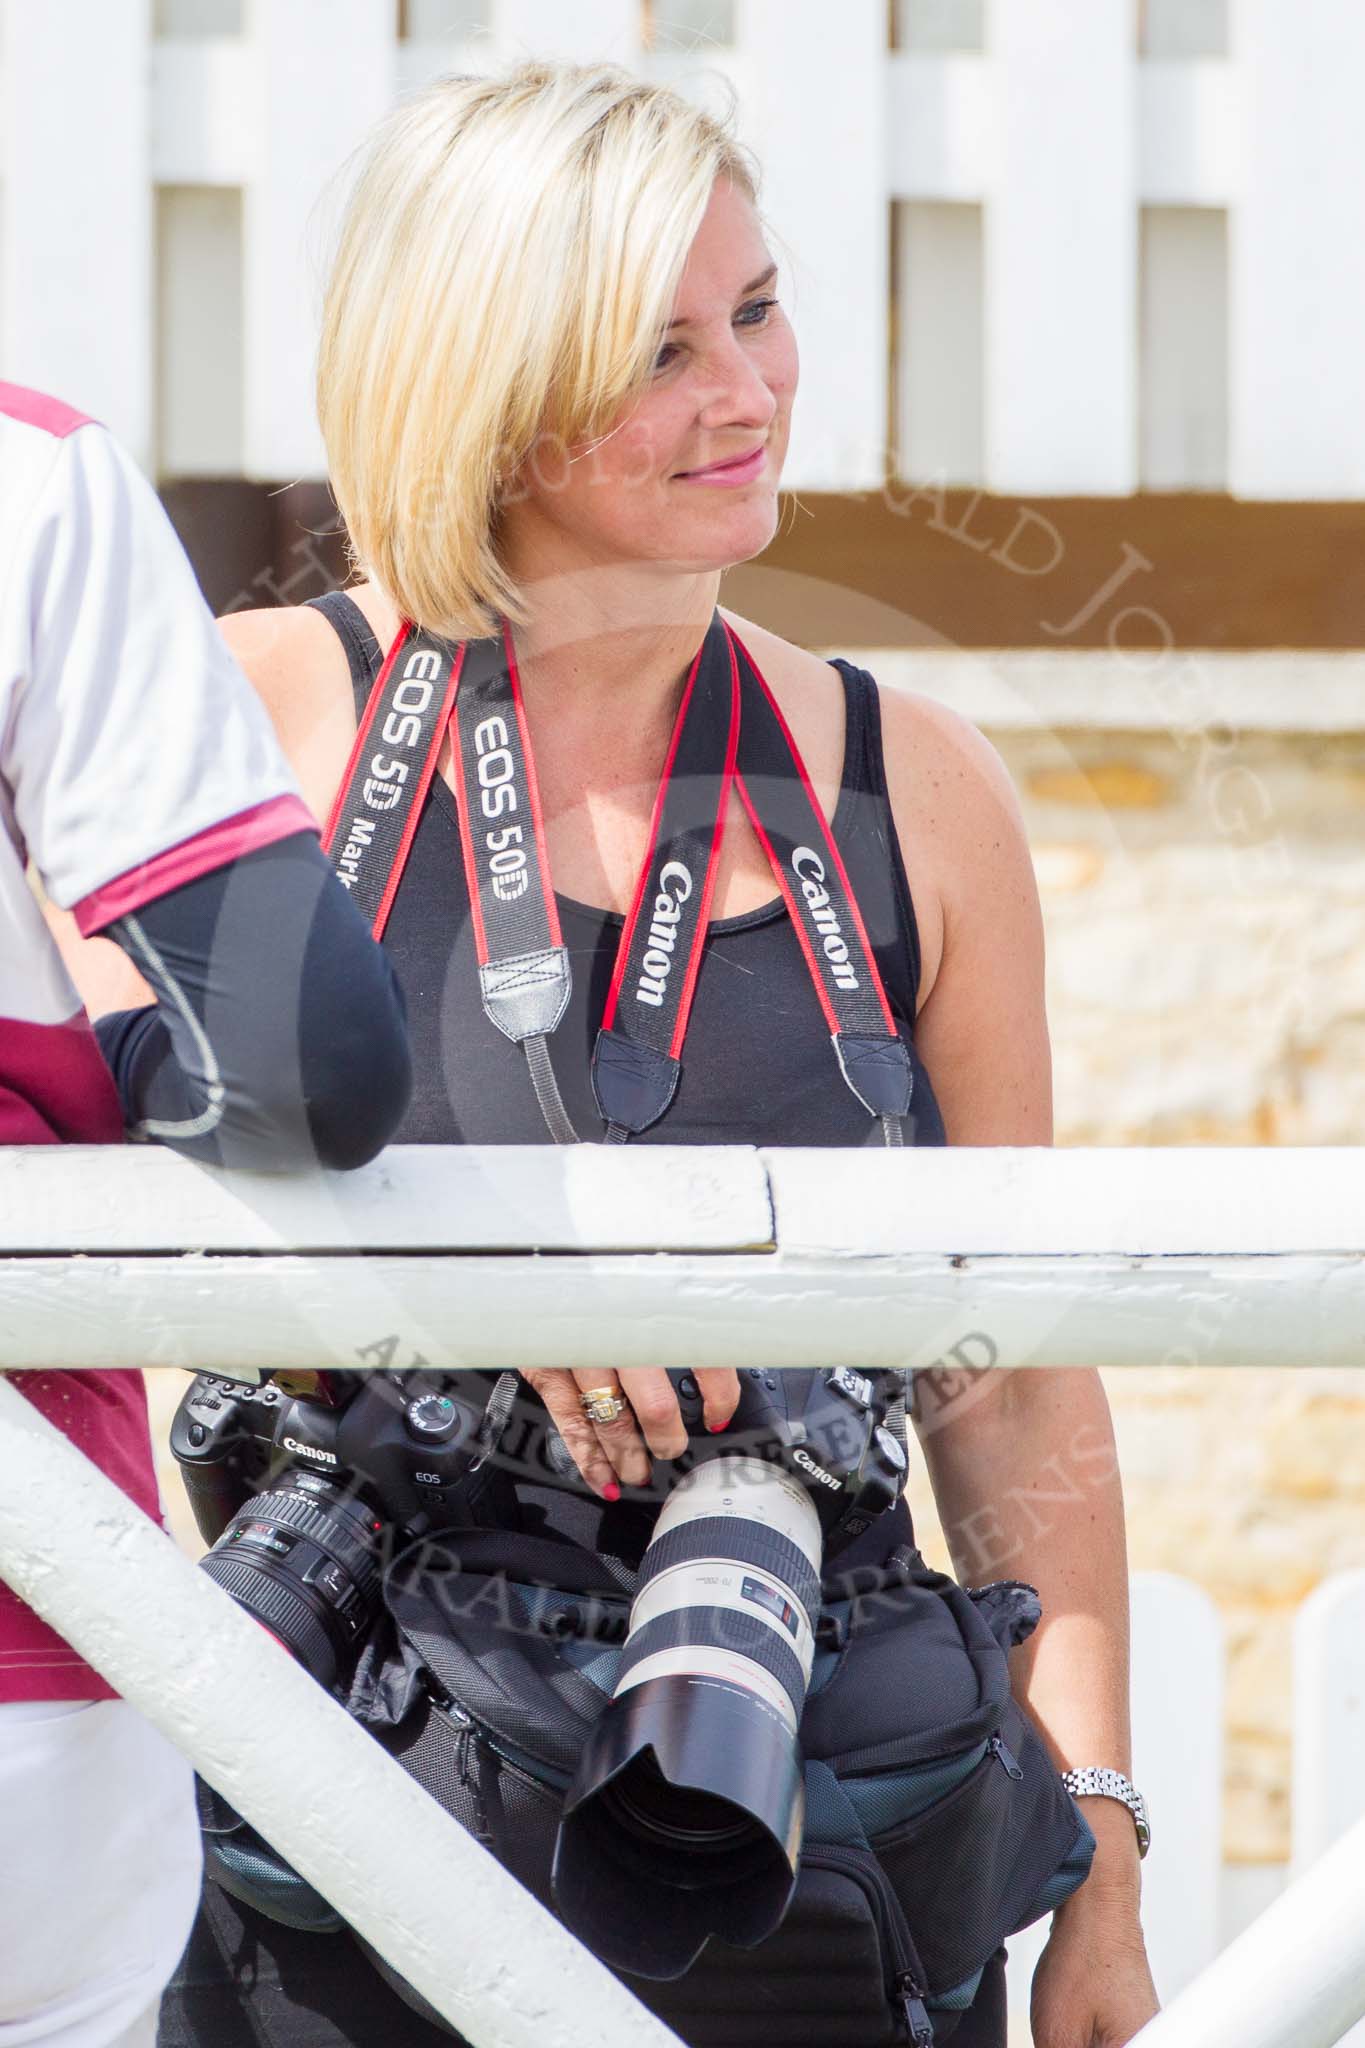 DBPC Polo in the Park 2013: Jane Collier, DBPC in-house photographer, covering the social side of Polo in the Park..
Dallas Burston Polo Club, ,
Southam,
Warwickshire,
United Kingdom,
on 01 September 2013 at 12:40, image #209